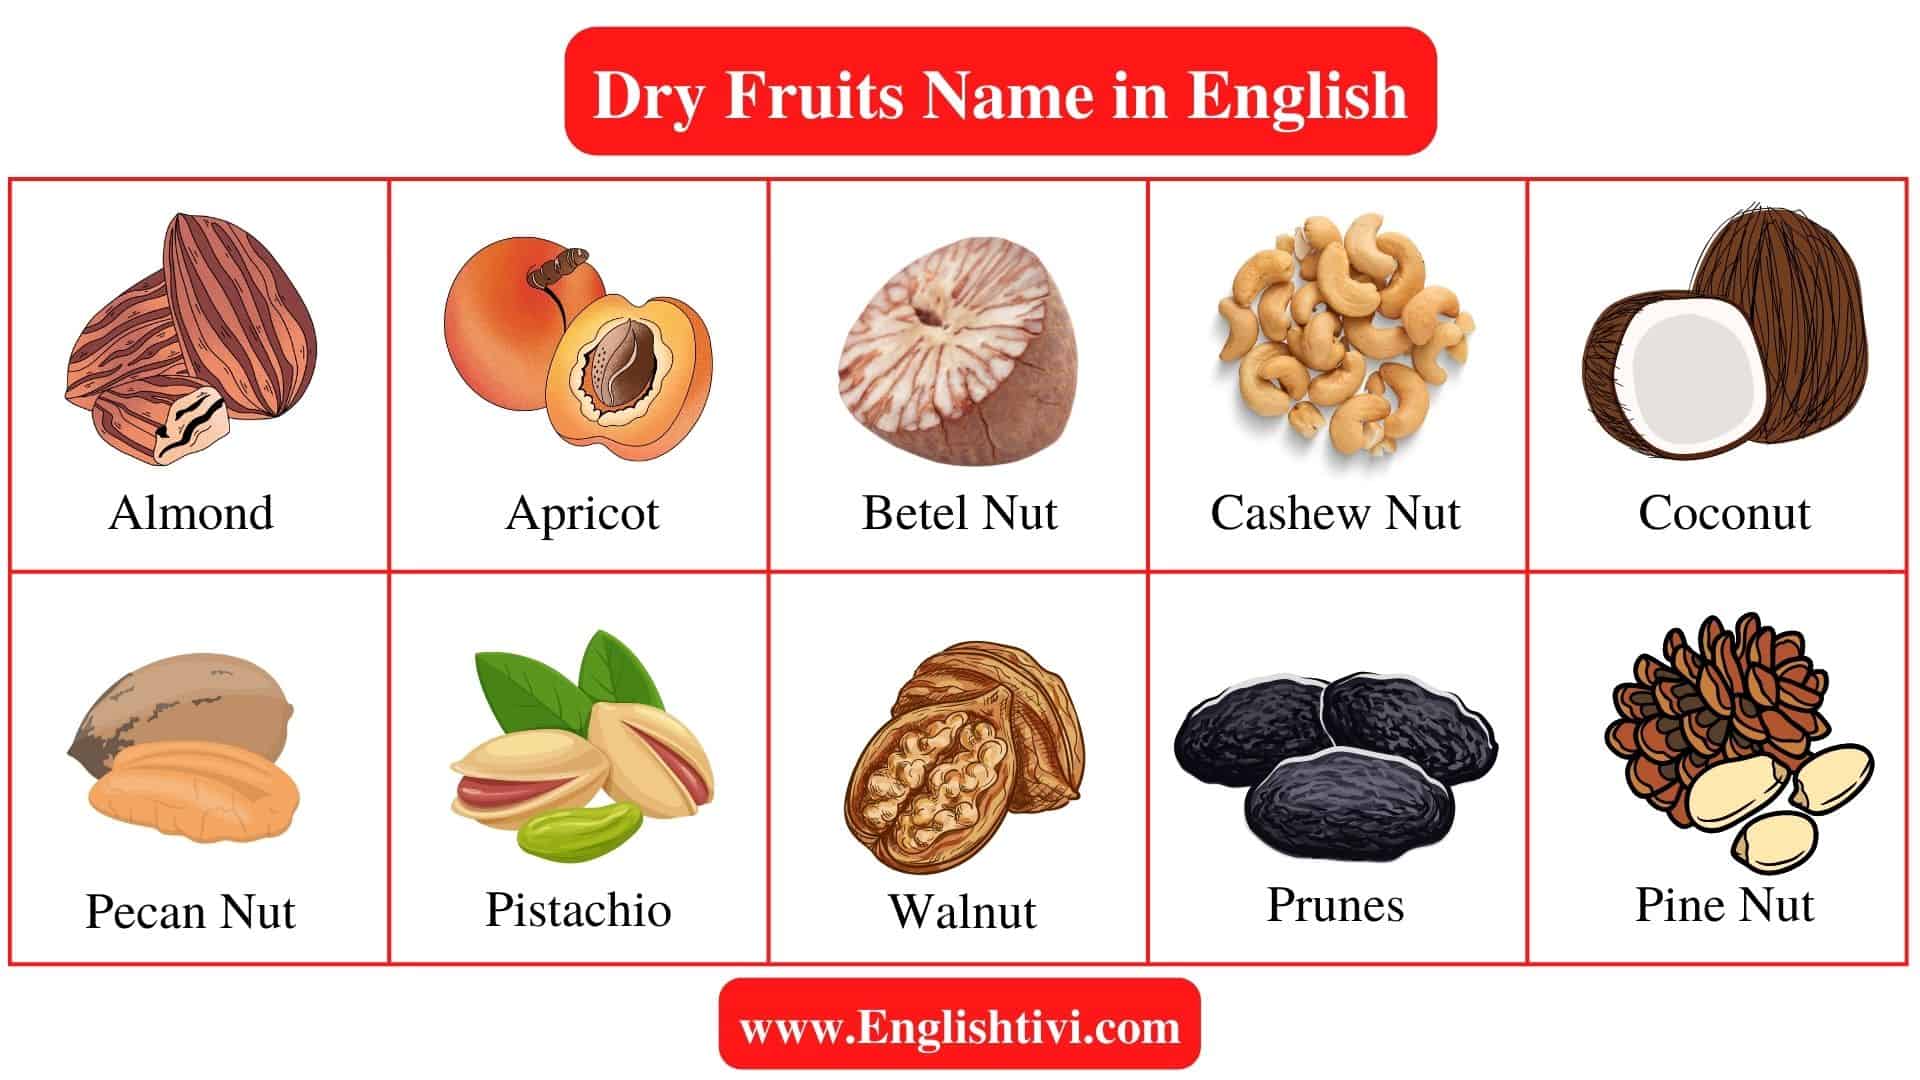 dry-fruits-name-in-english